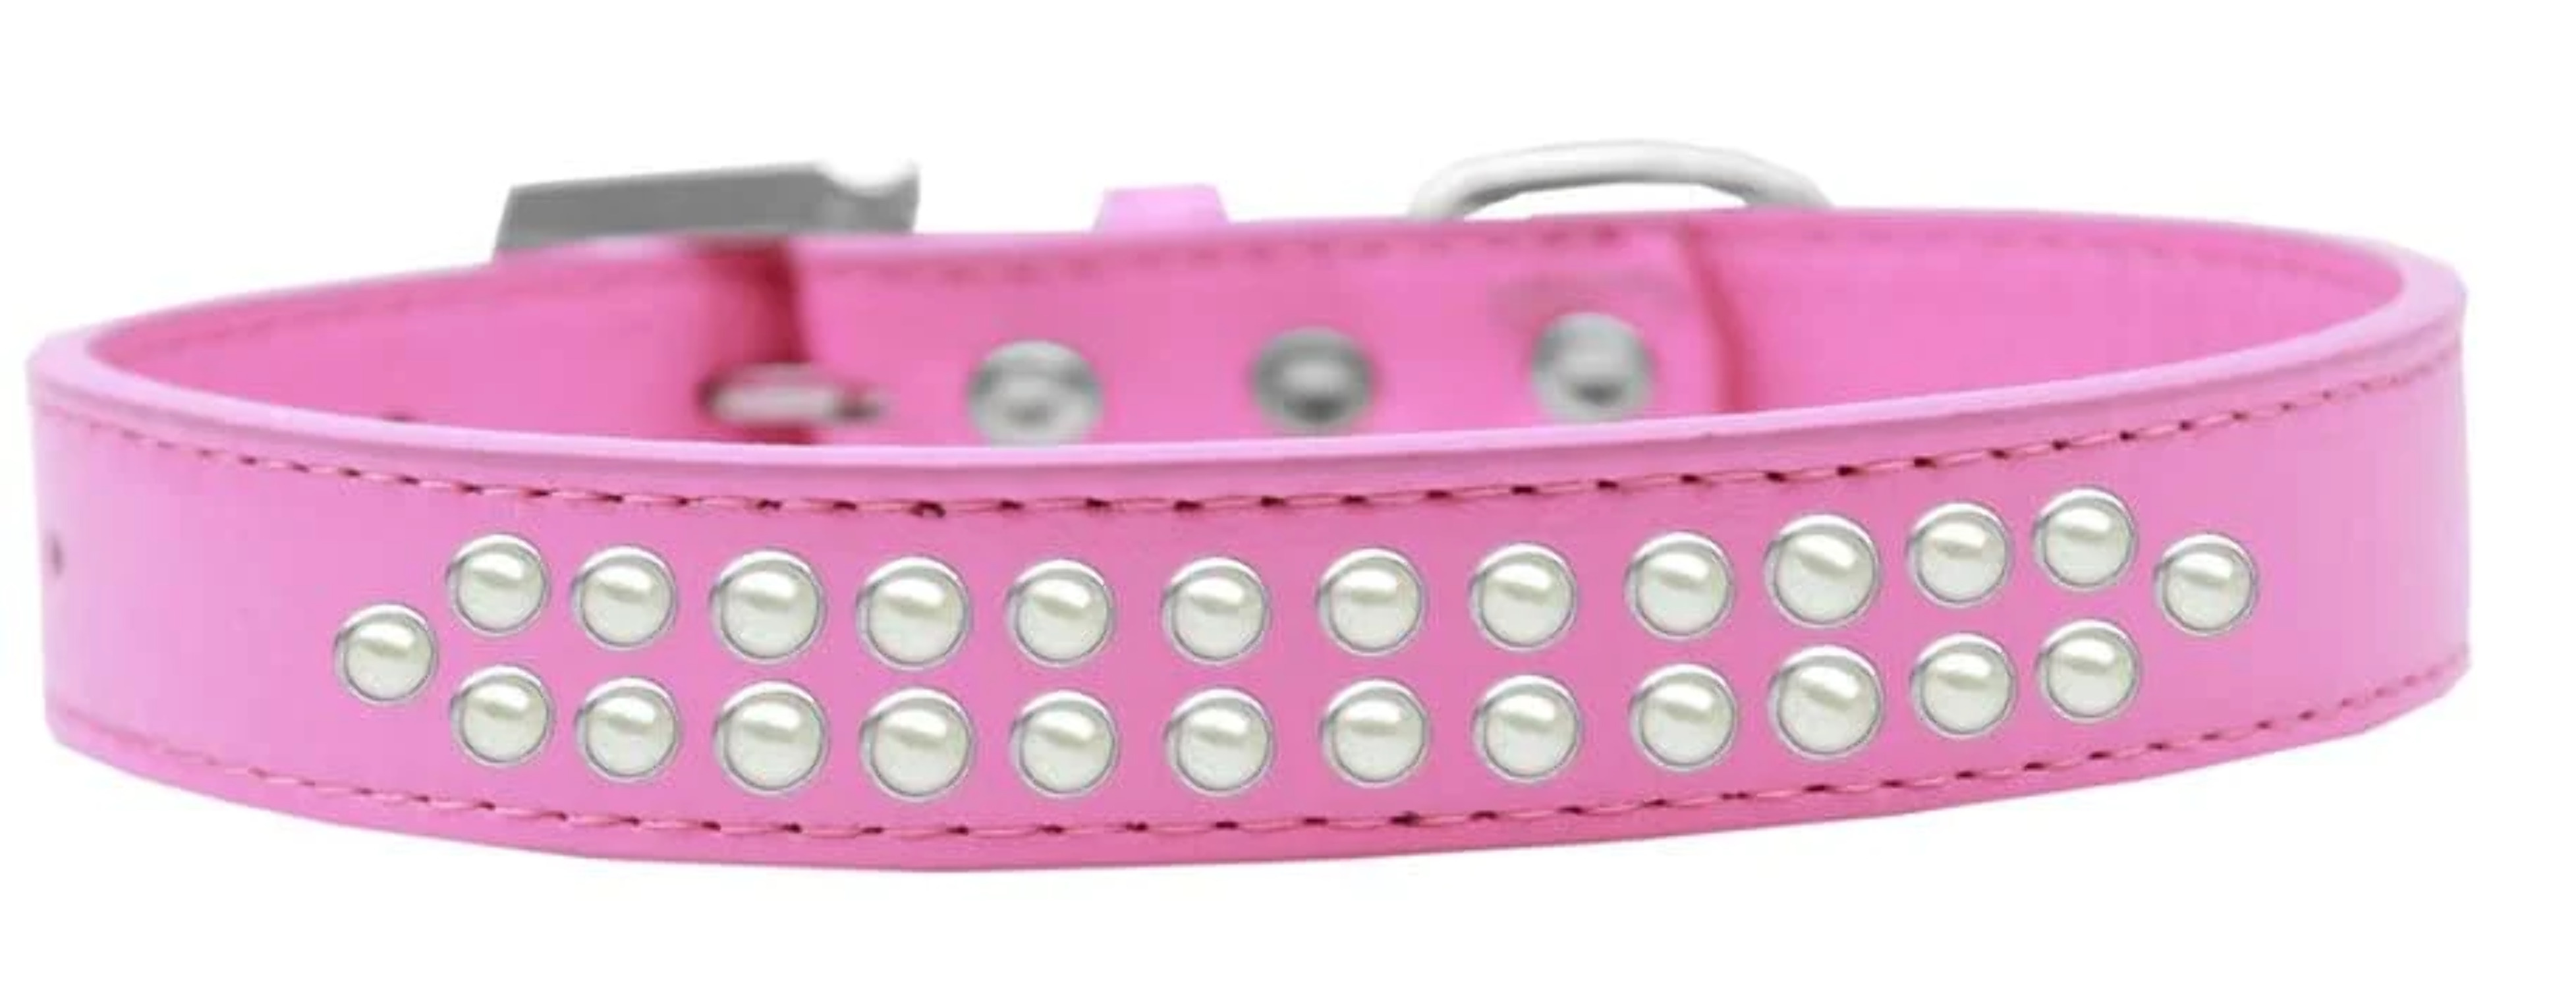 Mirage Pet Products613-03 LPK-14 Two Row Pearl Dog Collar, Light Pink - Size 14 - image 5 of 9